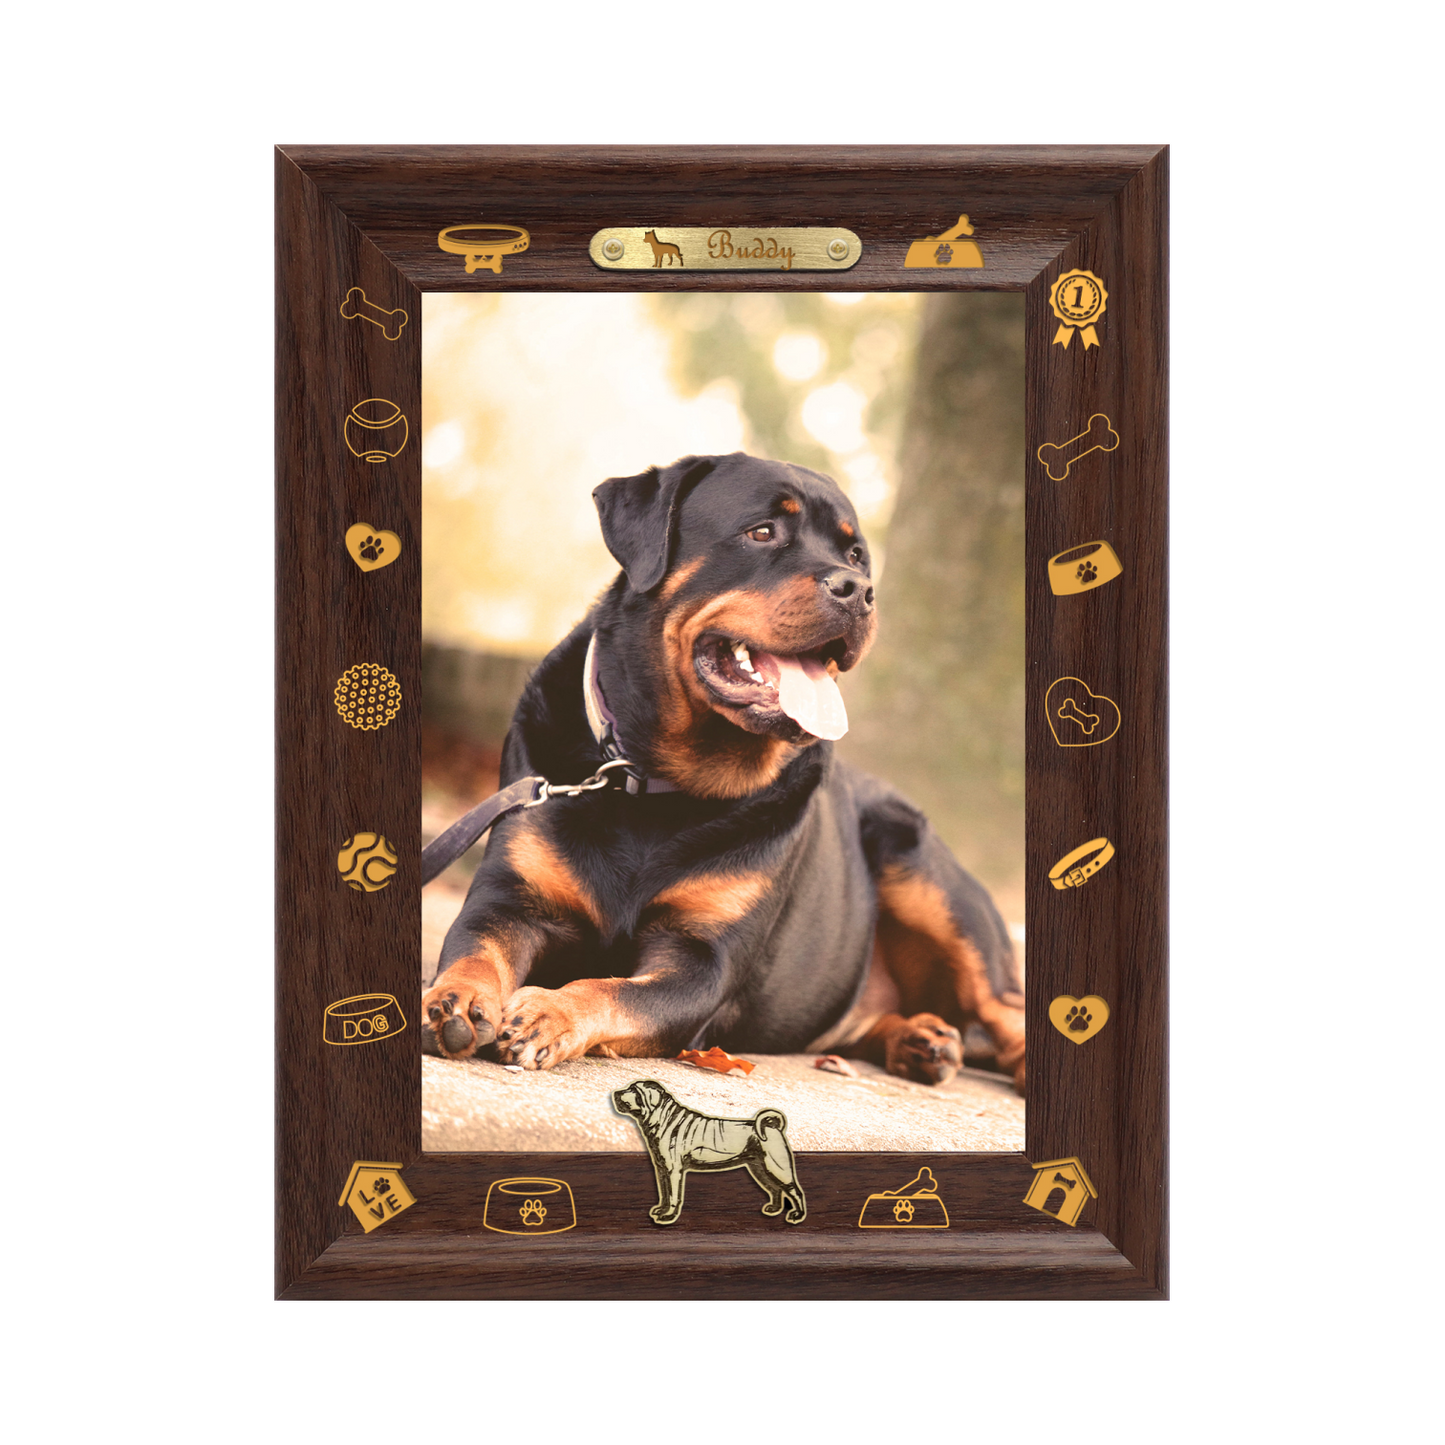 Decoration Photo Frame Dotride Custom Picture Frame, Wood Photo Frame with Custom Wooden Carving, Can be engraved with any text you want, suitable for Suitable for Various Themes, Golden Retriever